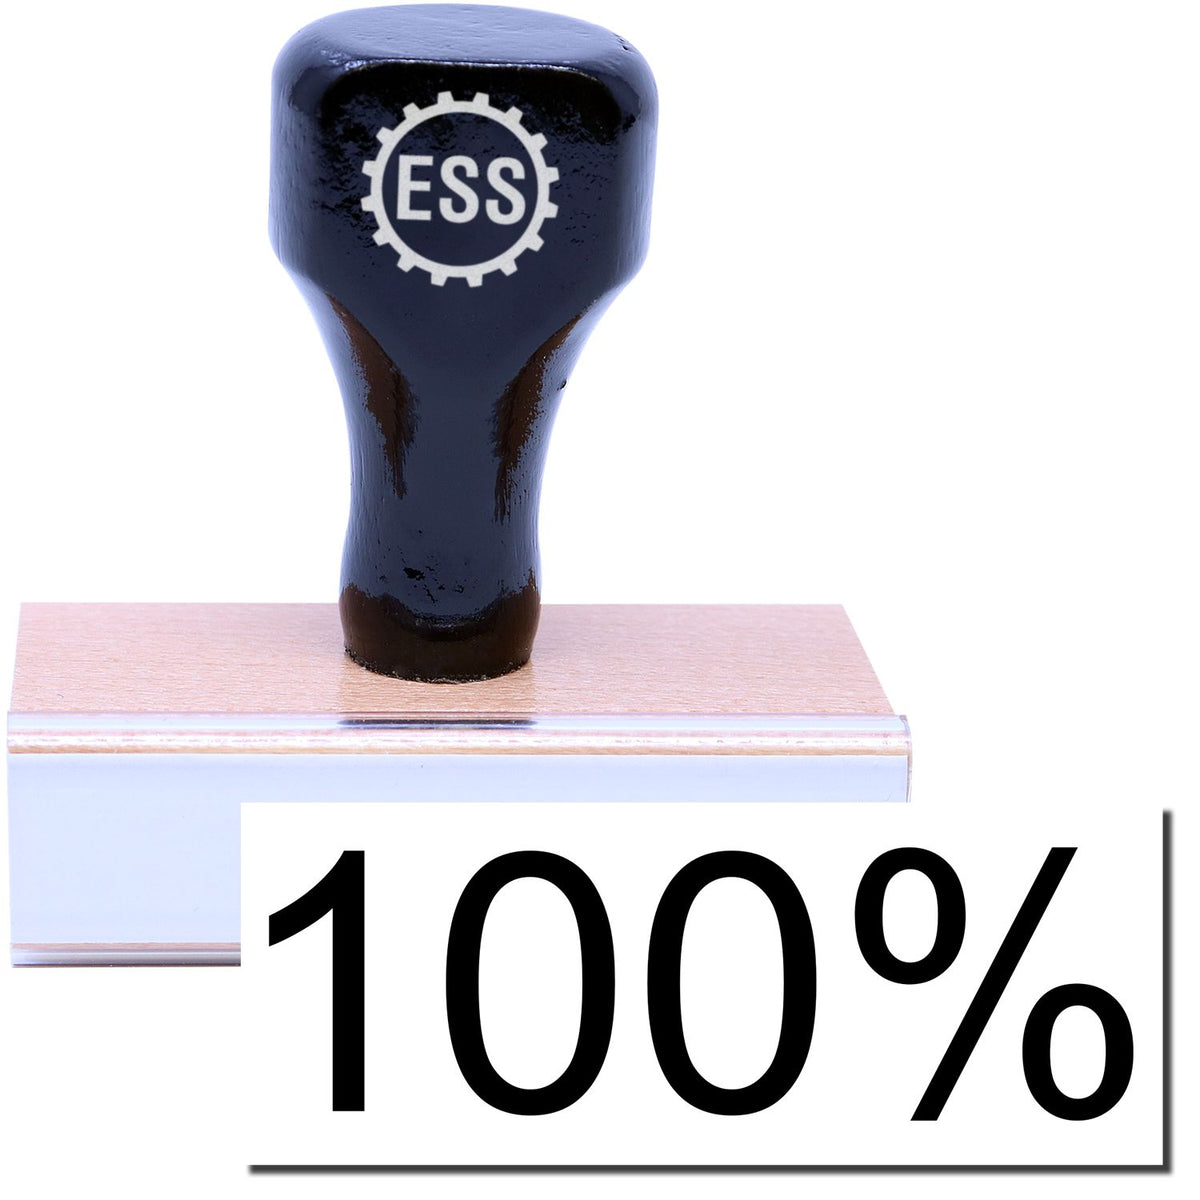 A stock office rubber stamp with a stamped image showing how the text &quot;100%&quot; in a large font is displayed after stamping.